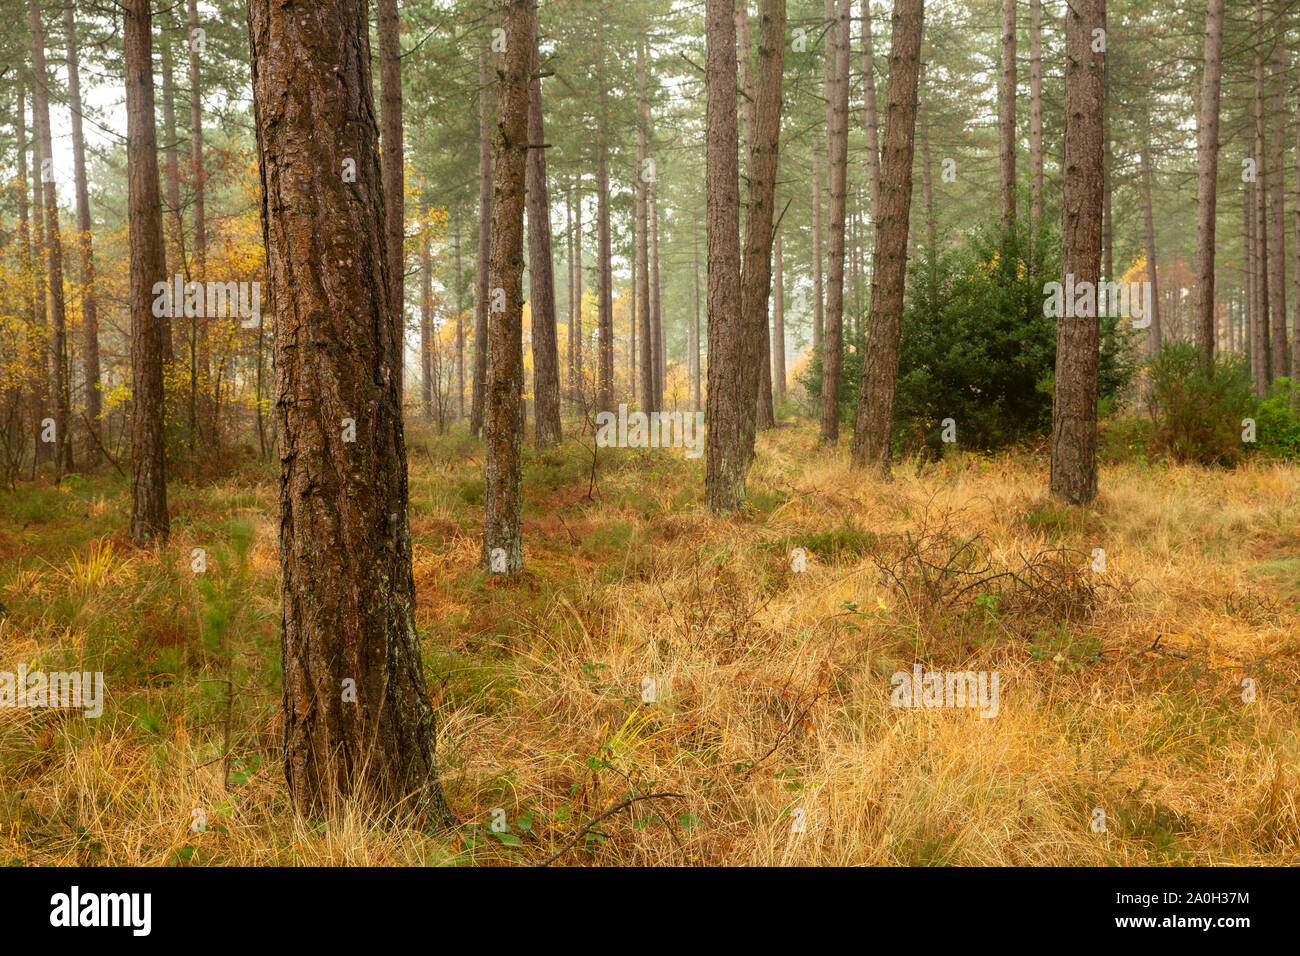 Woodland in autumn with misty conditions Stock Photo